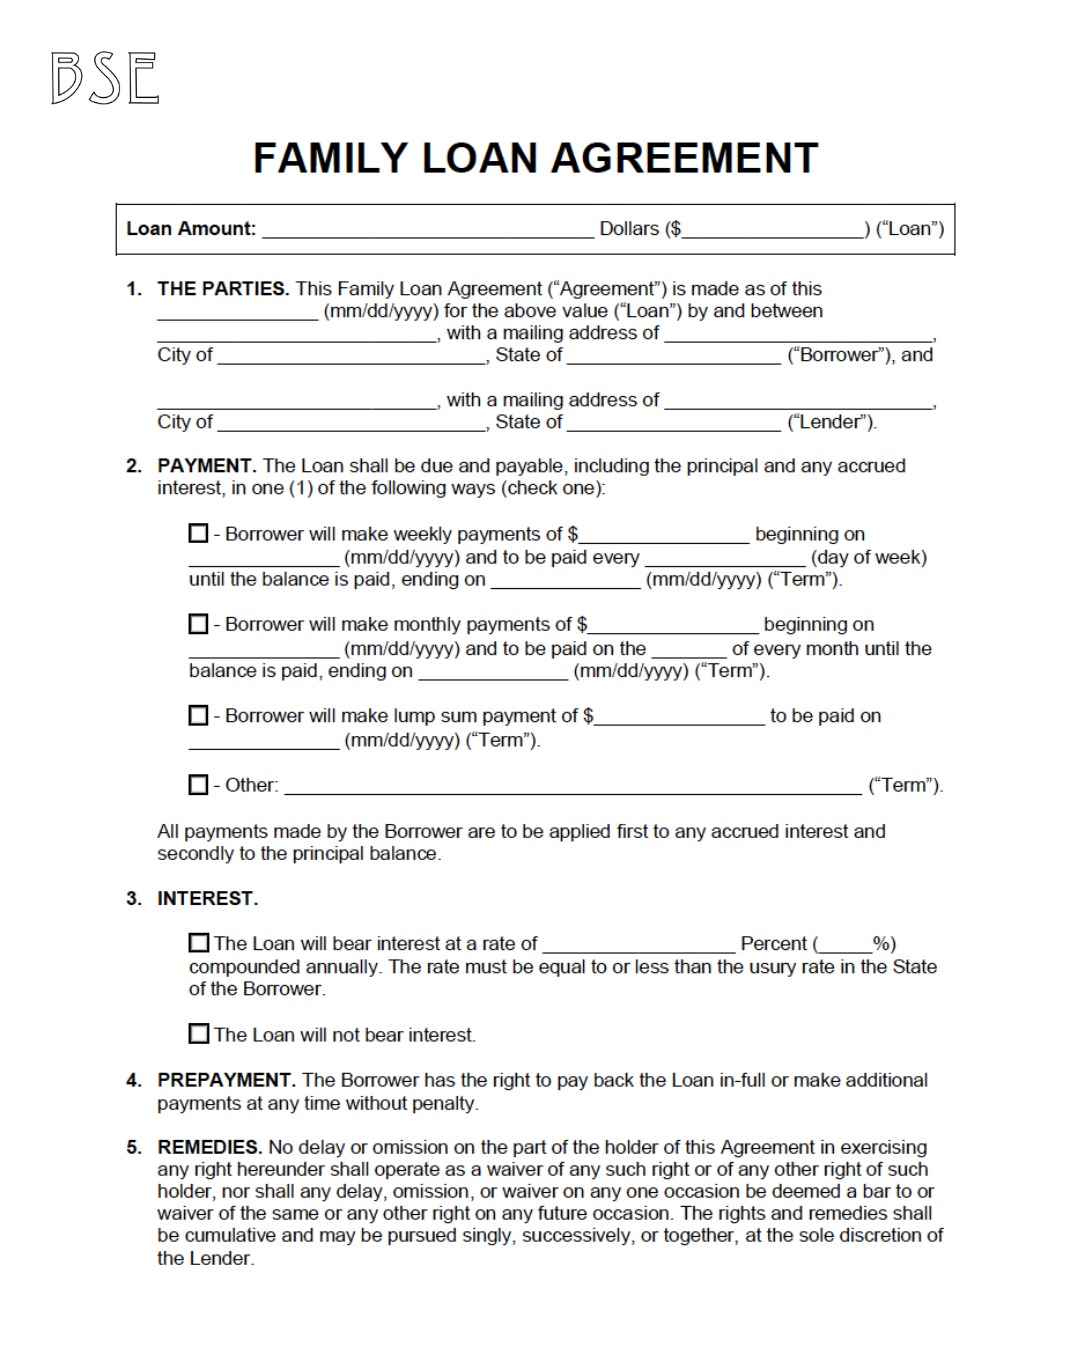 Use a Loan Agreement: Always create an official contract signed by both parties. The IRS requires this to distinguish loans from gifts. Without it, the IRS might consider it a gift subject to gift tax rules.